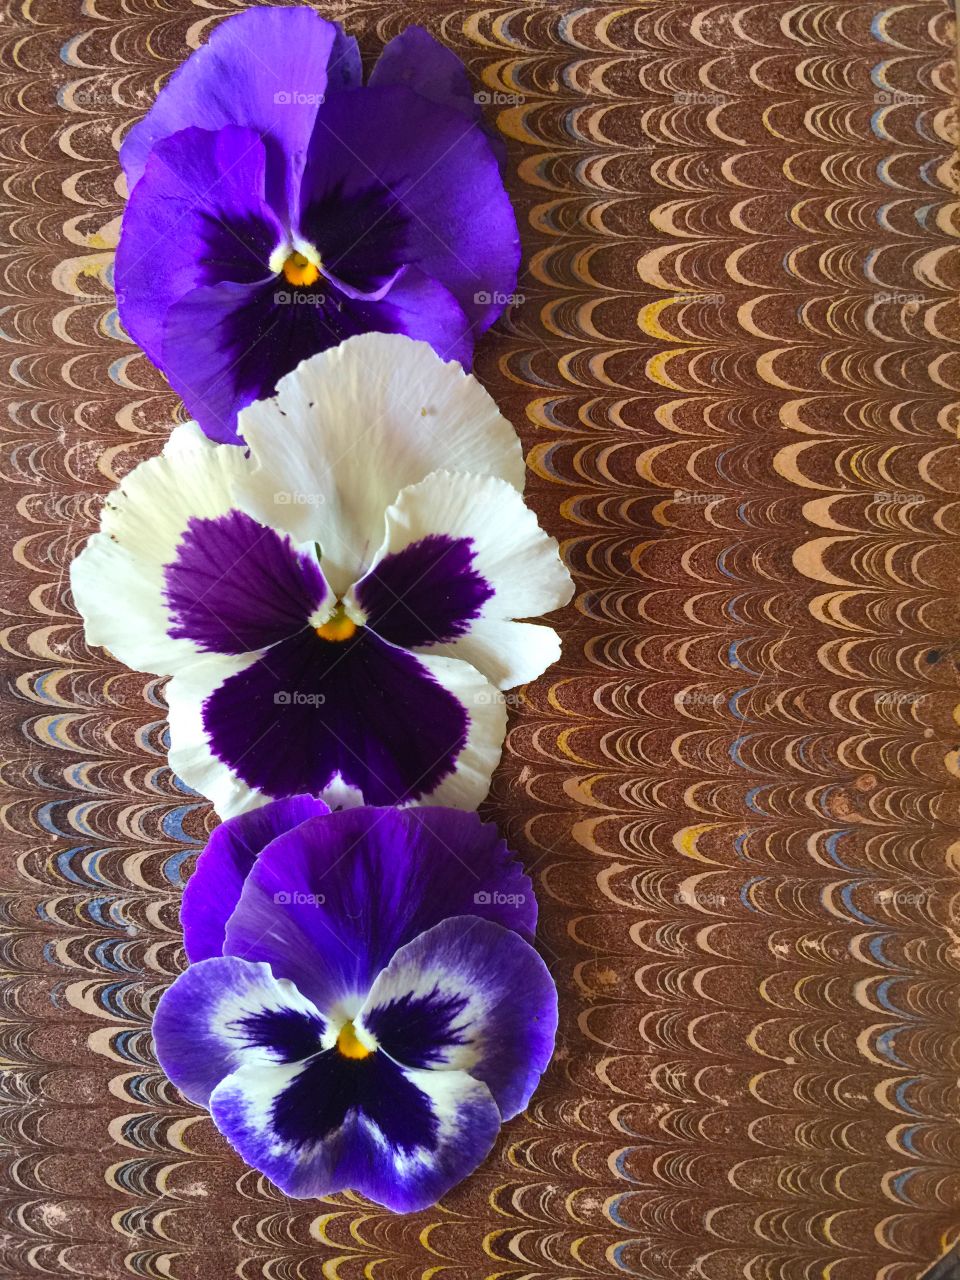 Pansies on a vintage book cover